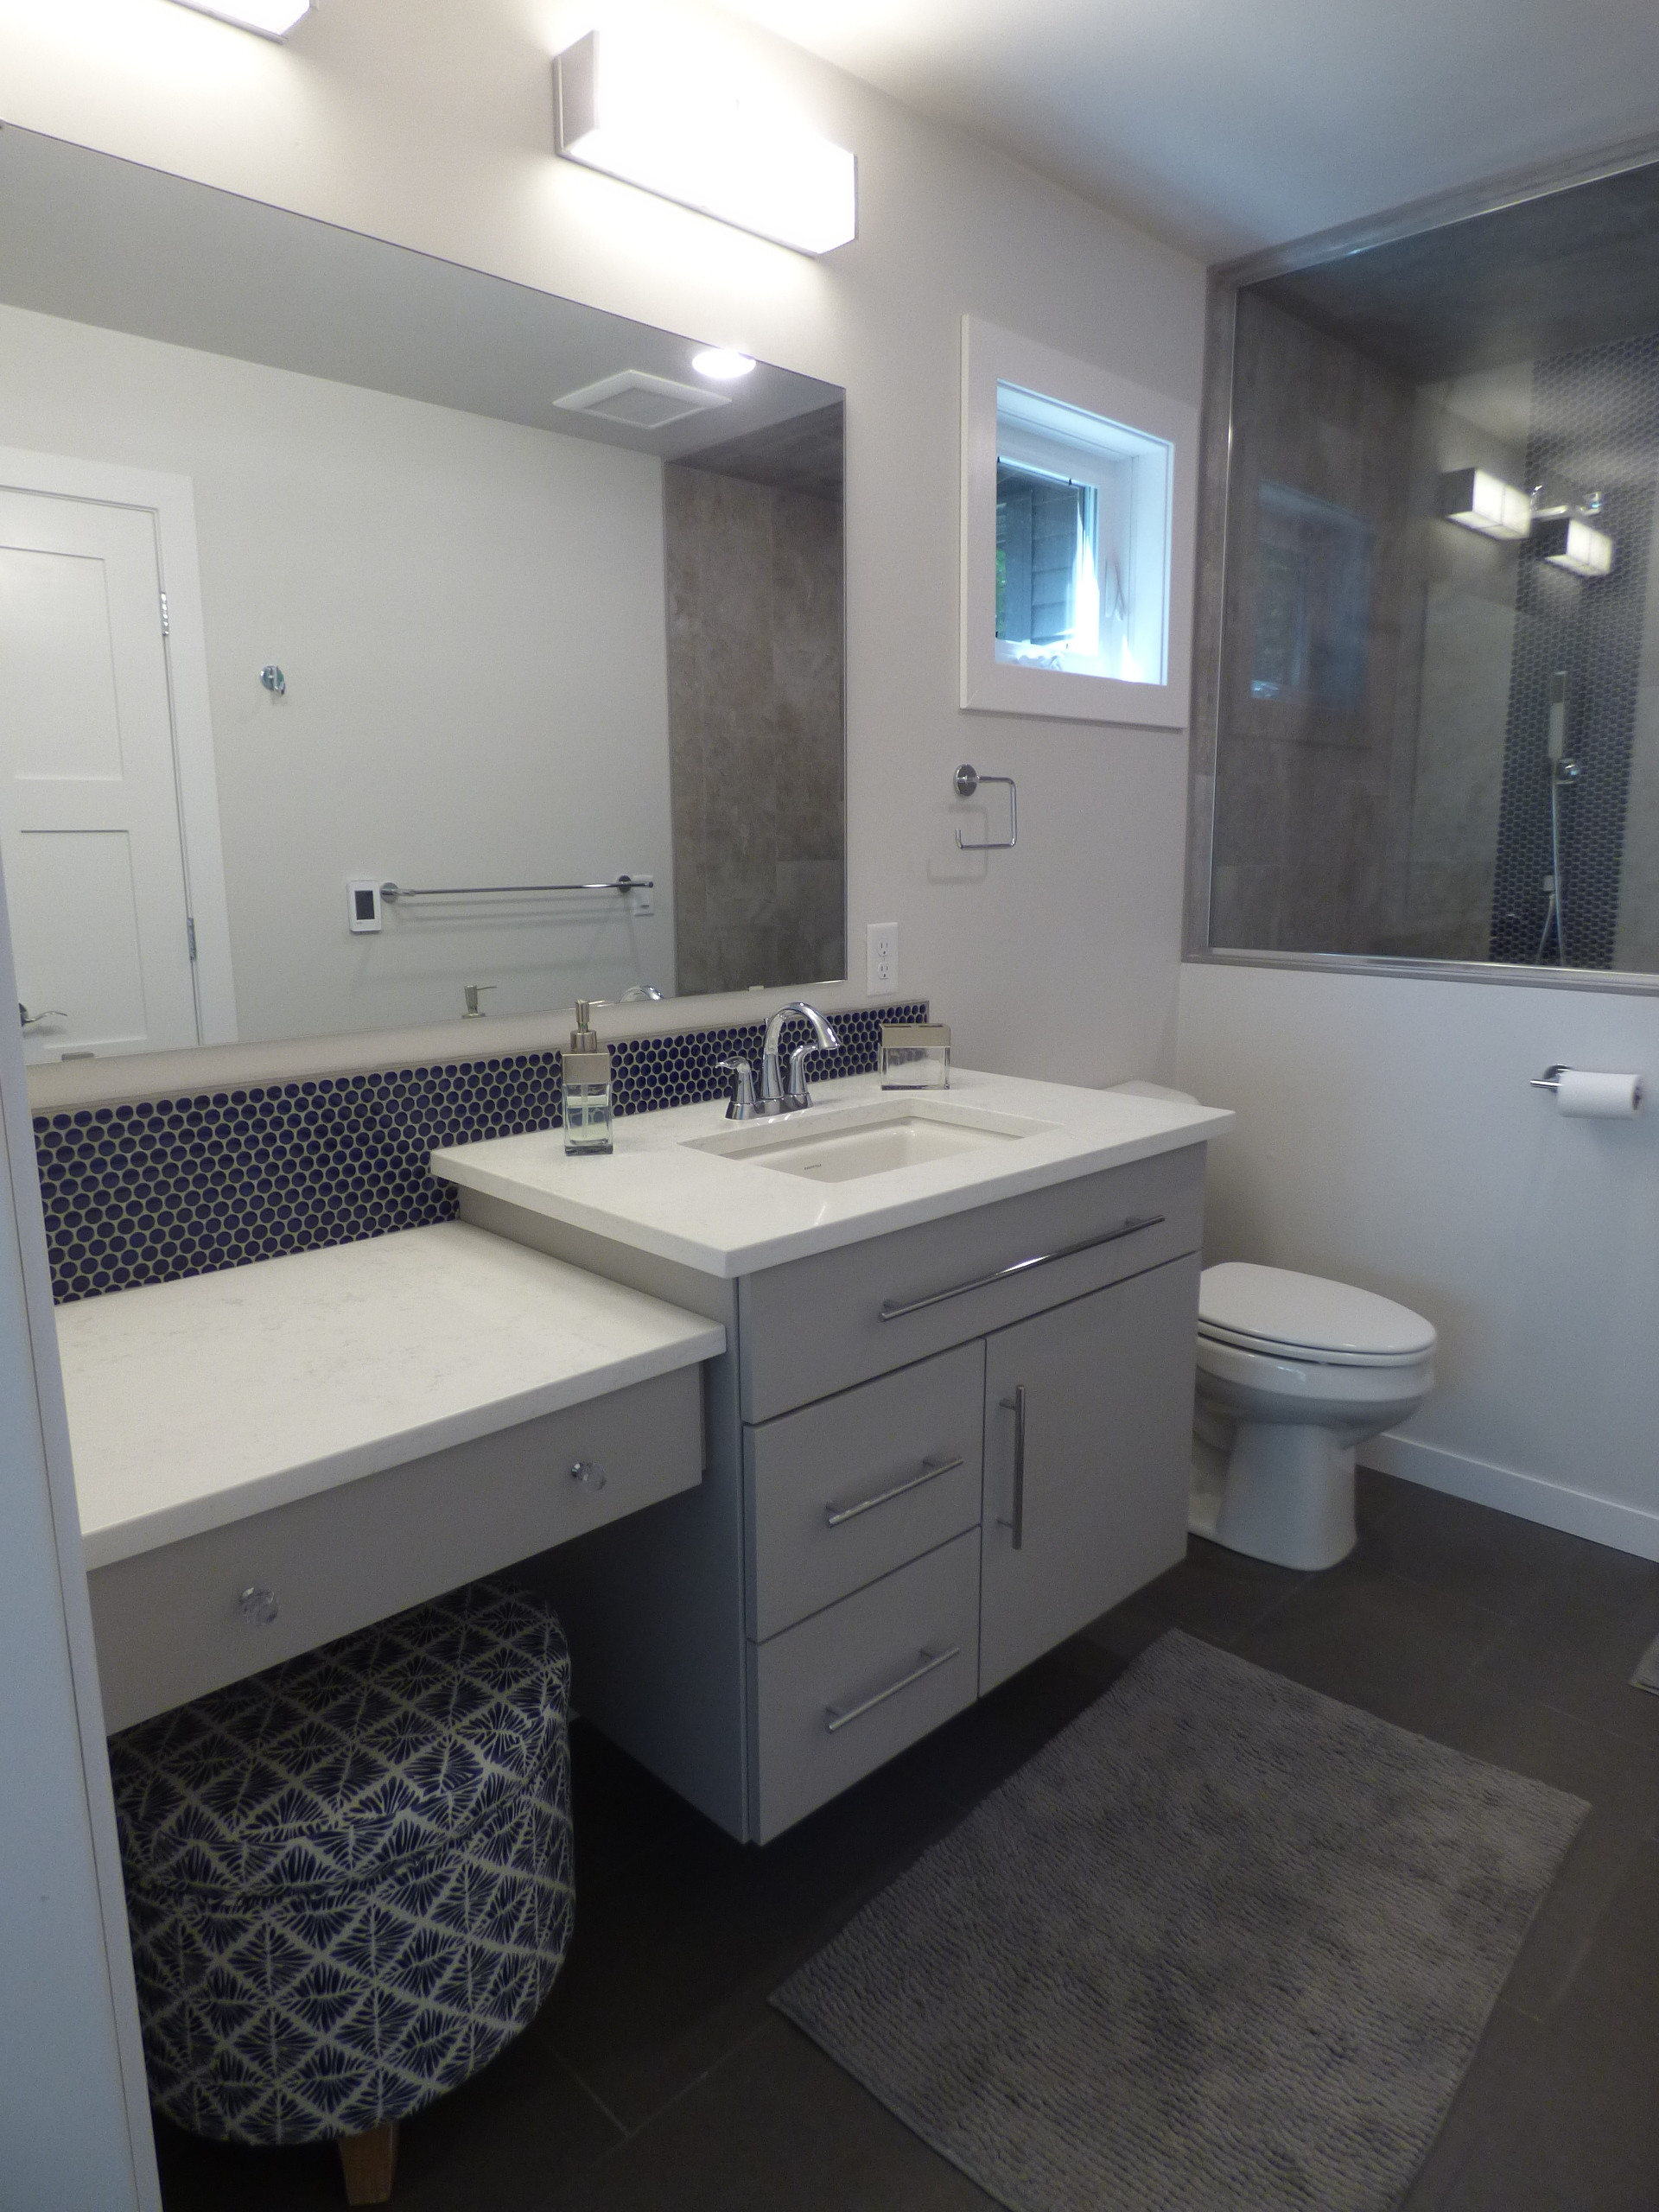 The Master Shower has a custom tile wall in large format ceramic, with a small blue honeycomb tile accent to match the floor and backsplash.  The floating vanity has a lowered makeup counter. A transo